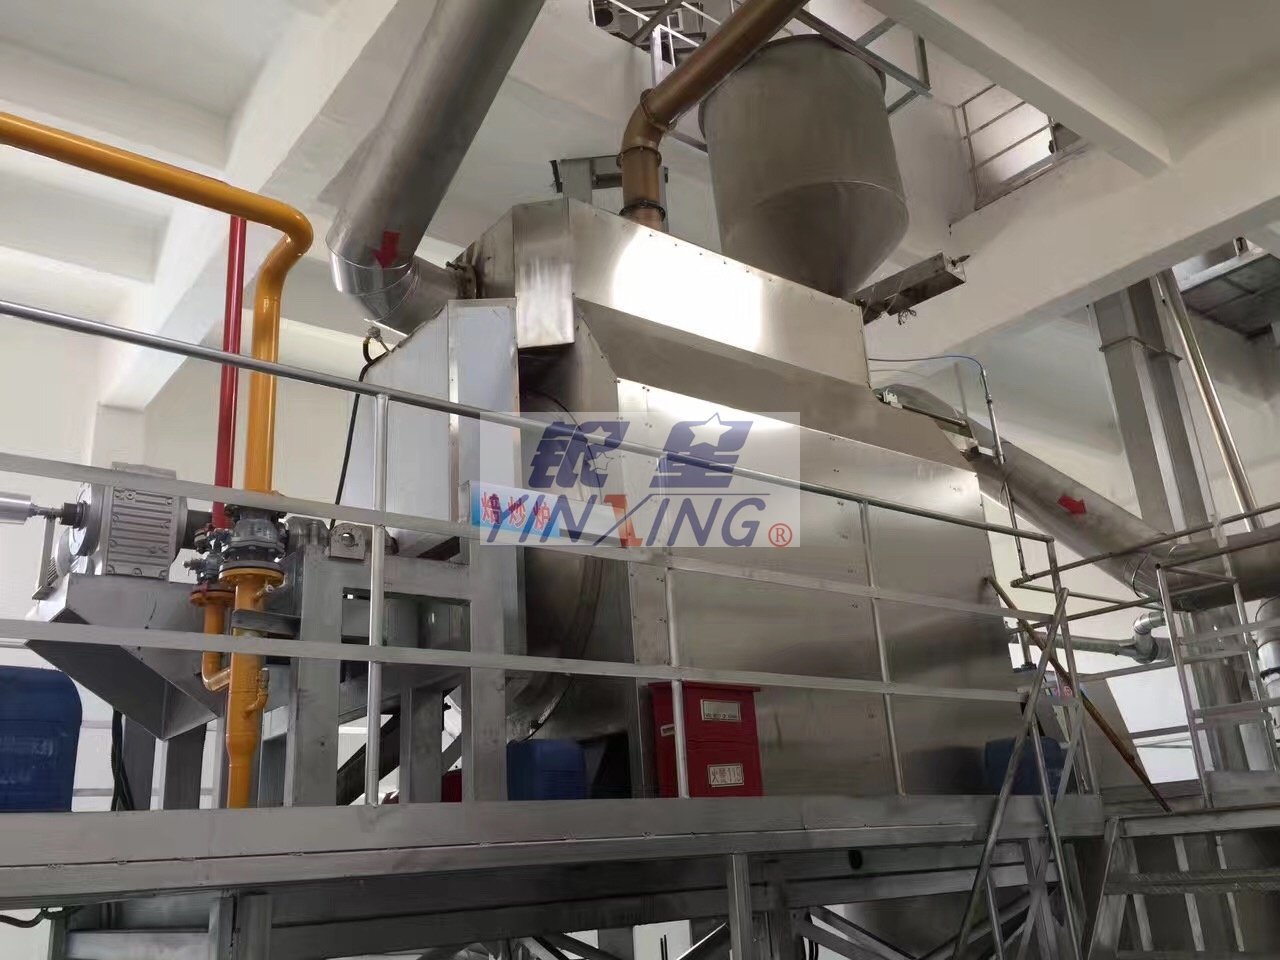 In 2017, Yinxing Group installed a special 800kg malt roasting system for X Shuntai Group.